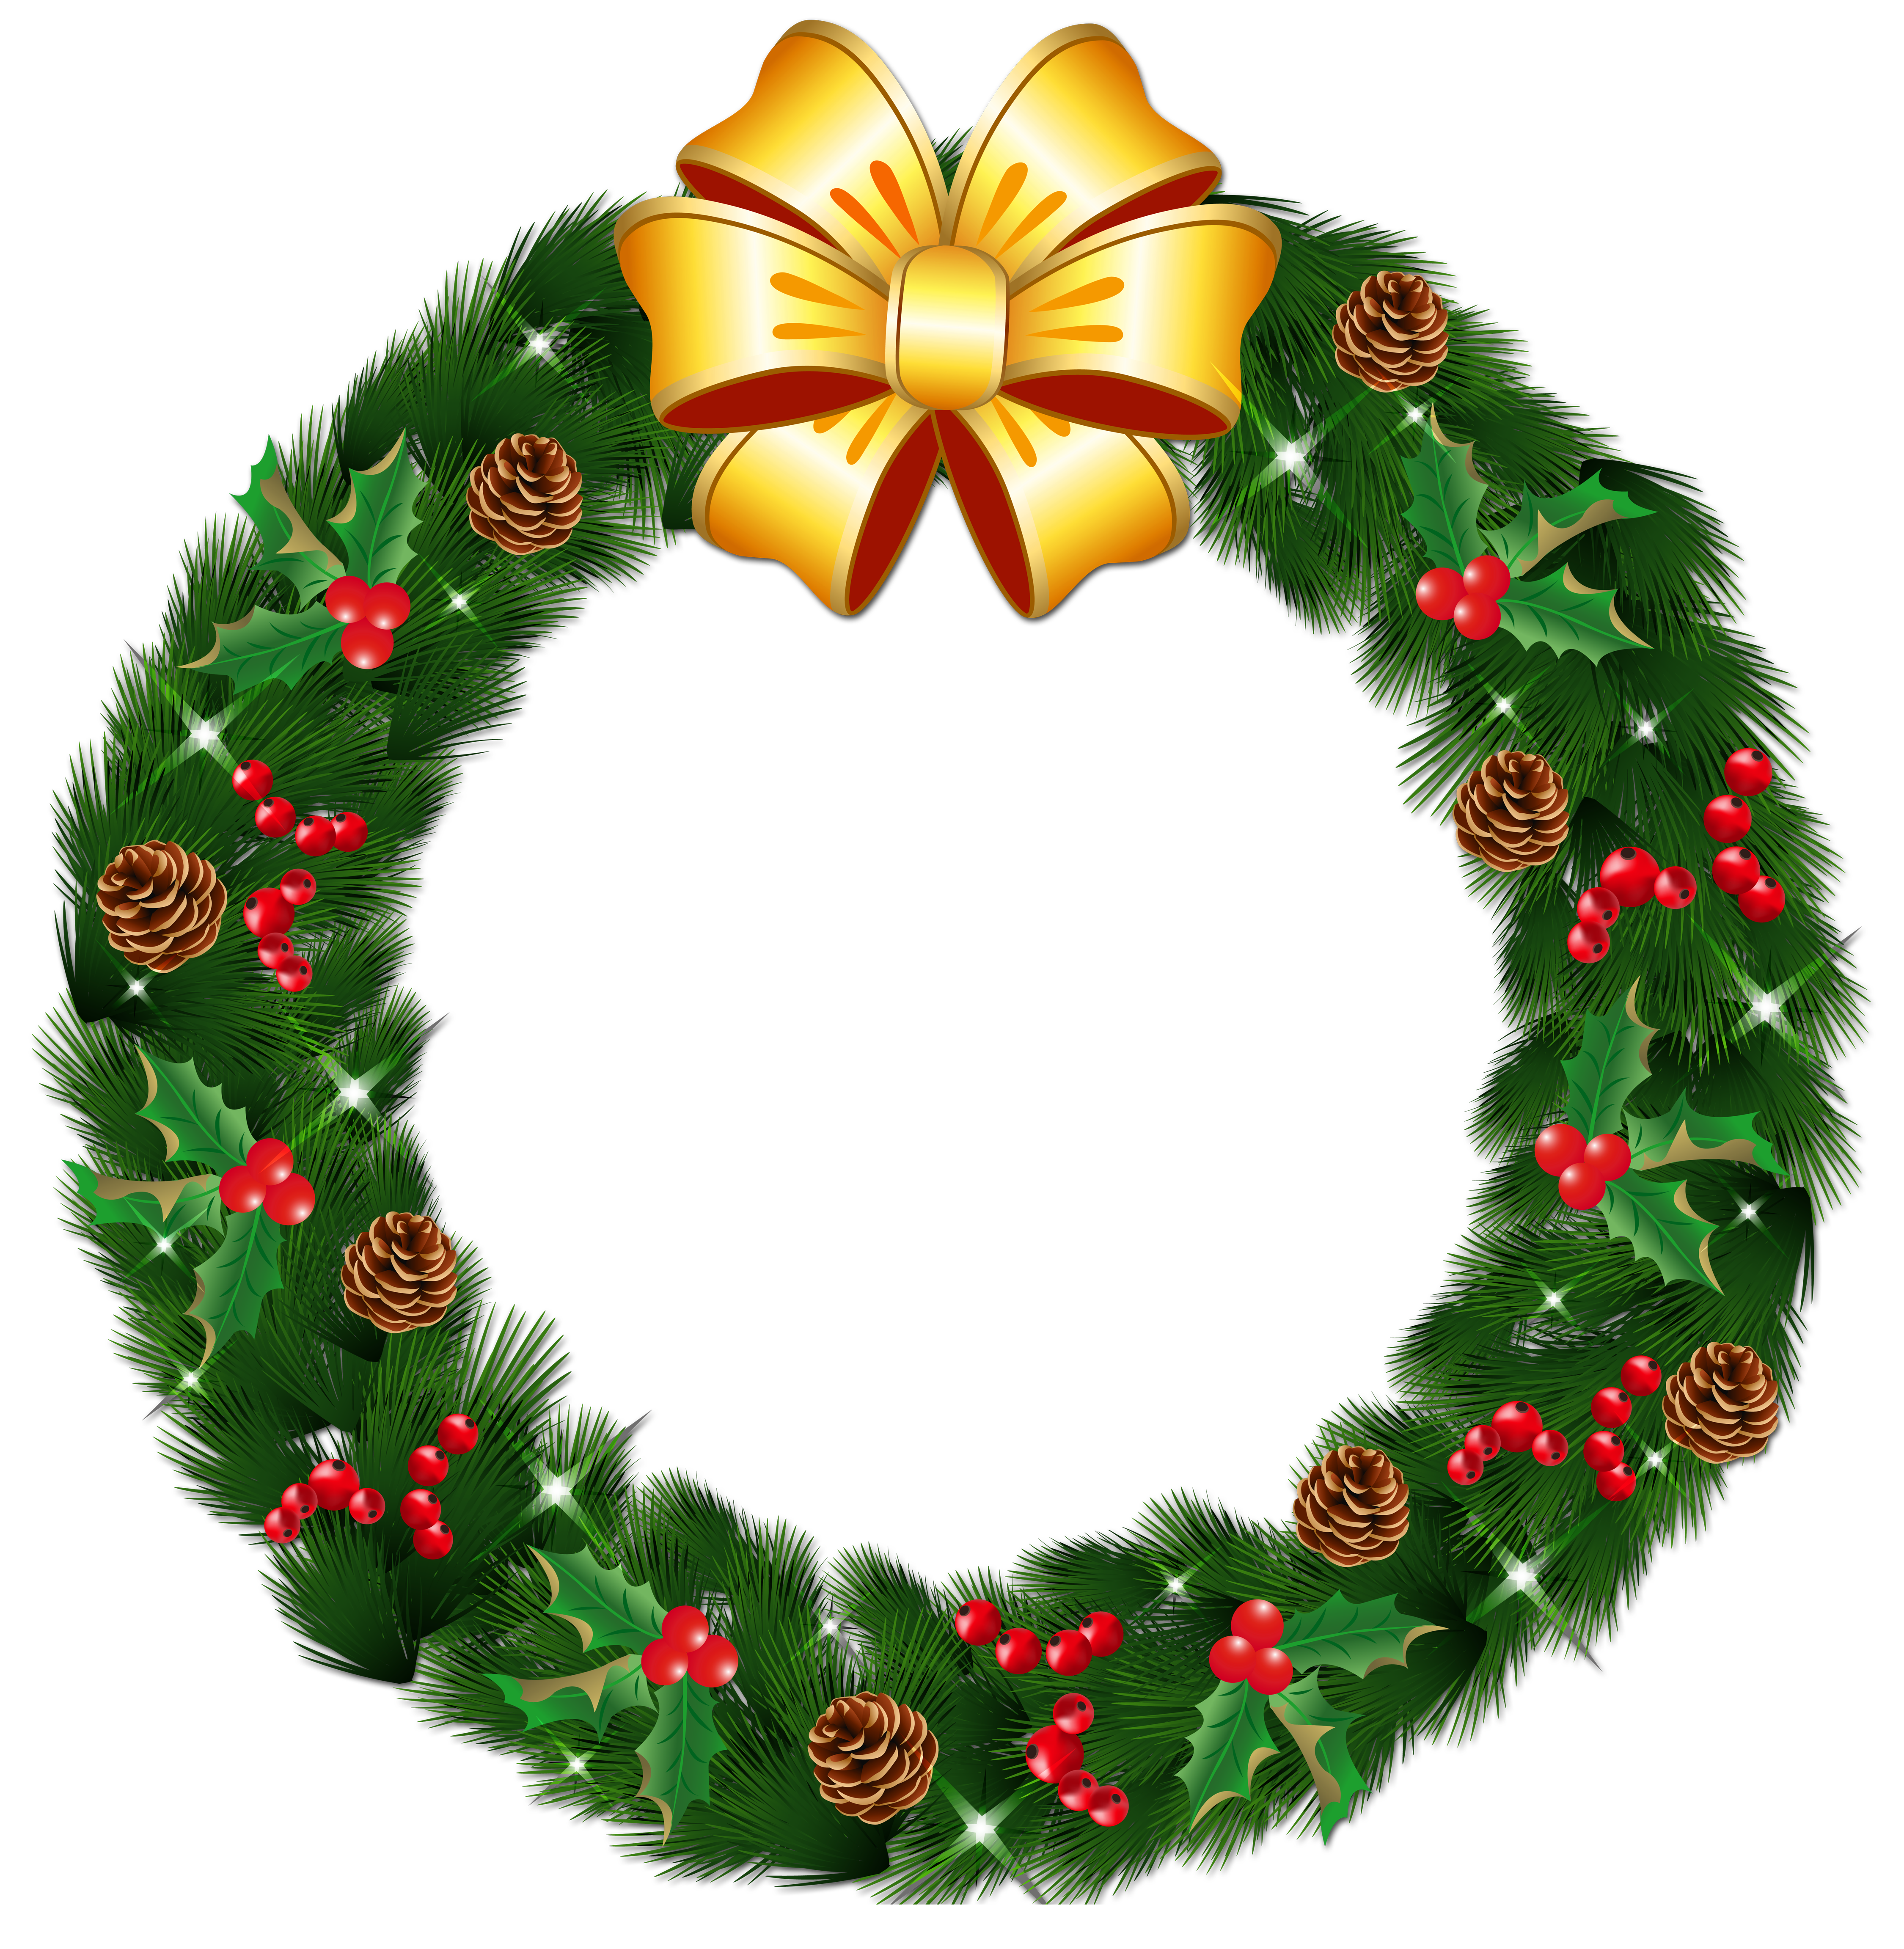 Transparent Christmas Pine Wreath with Gold Bow PNG Clipart 